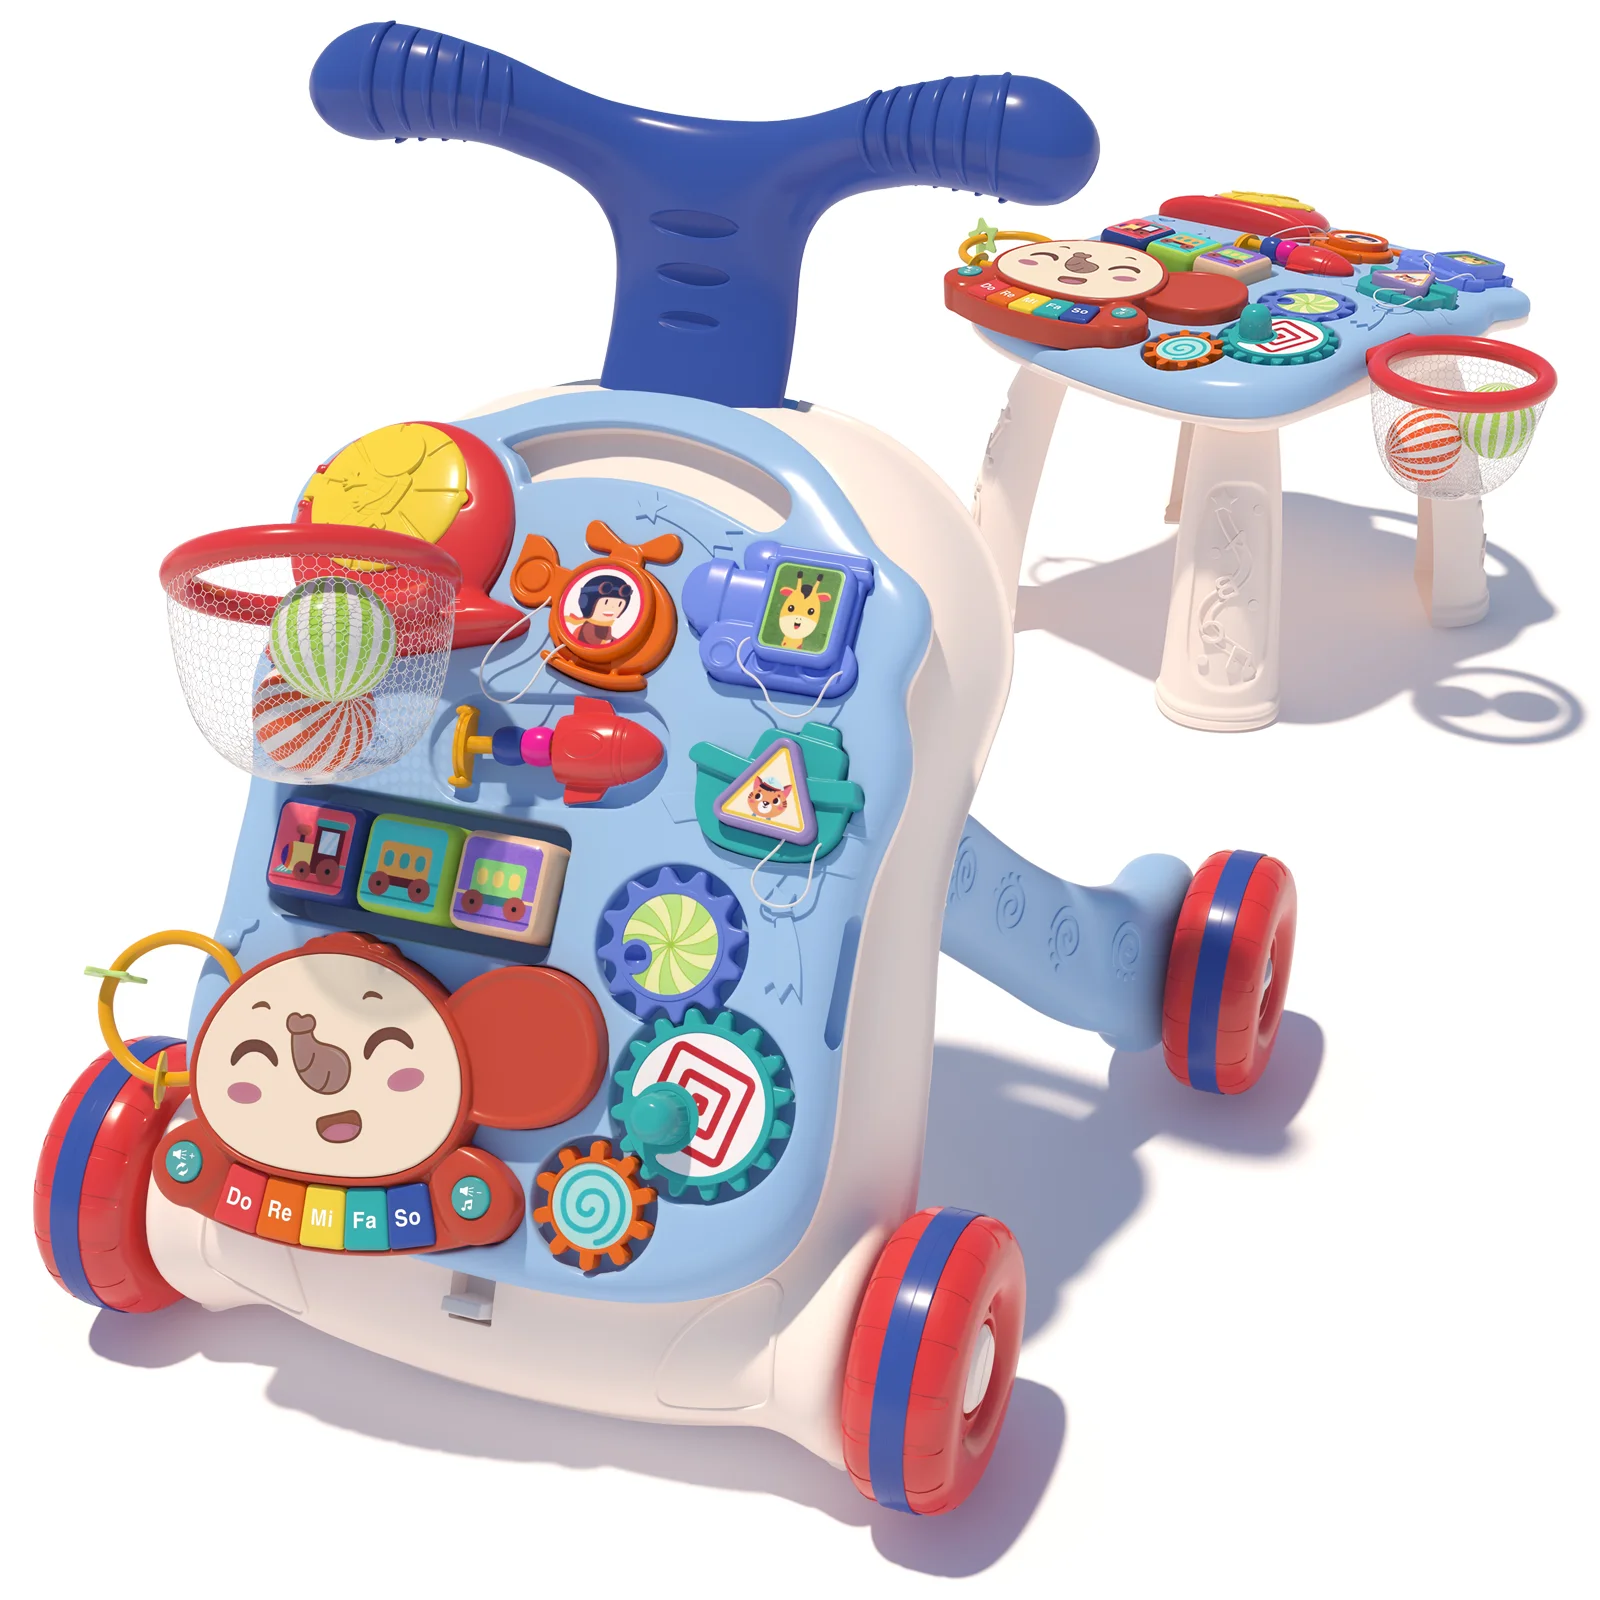 QDRAGON 3 in 1 Baby Walker Multifuctional Walkers Sit-to-Stand Learning ABS Musical Walker Toys For Baby Kids Early Toy